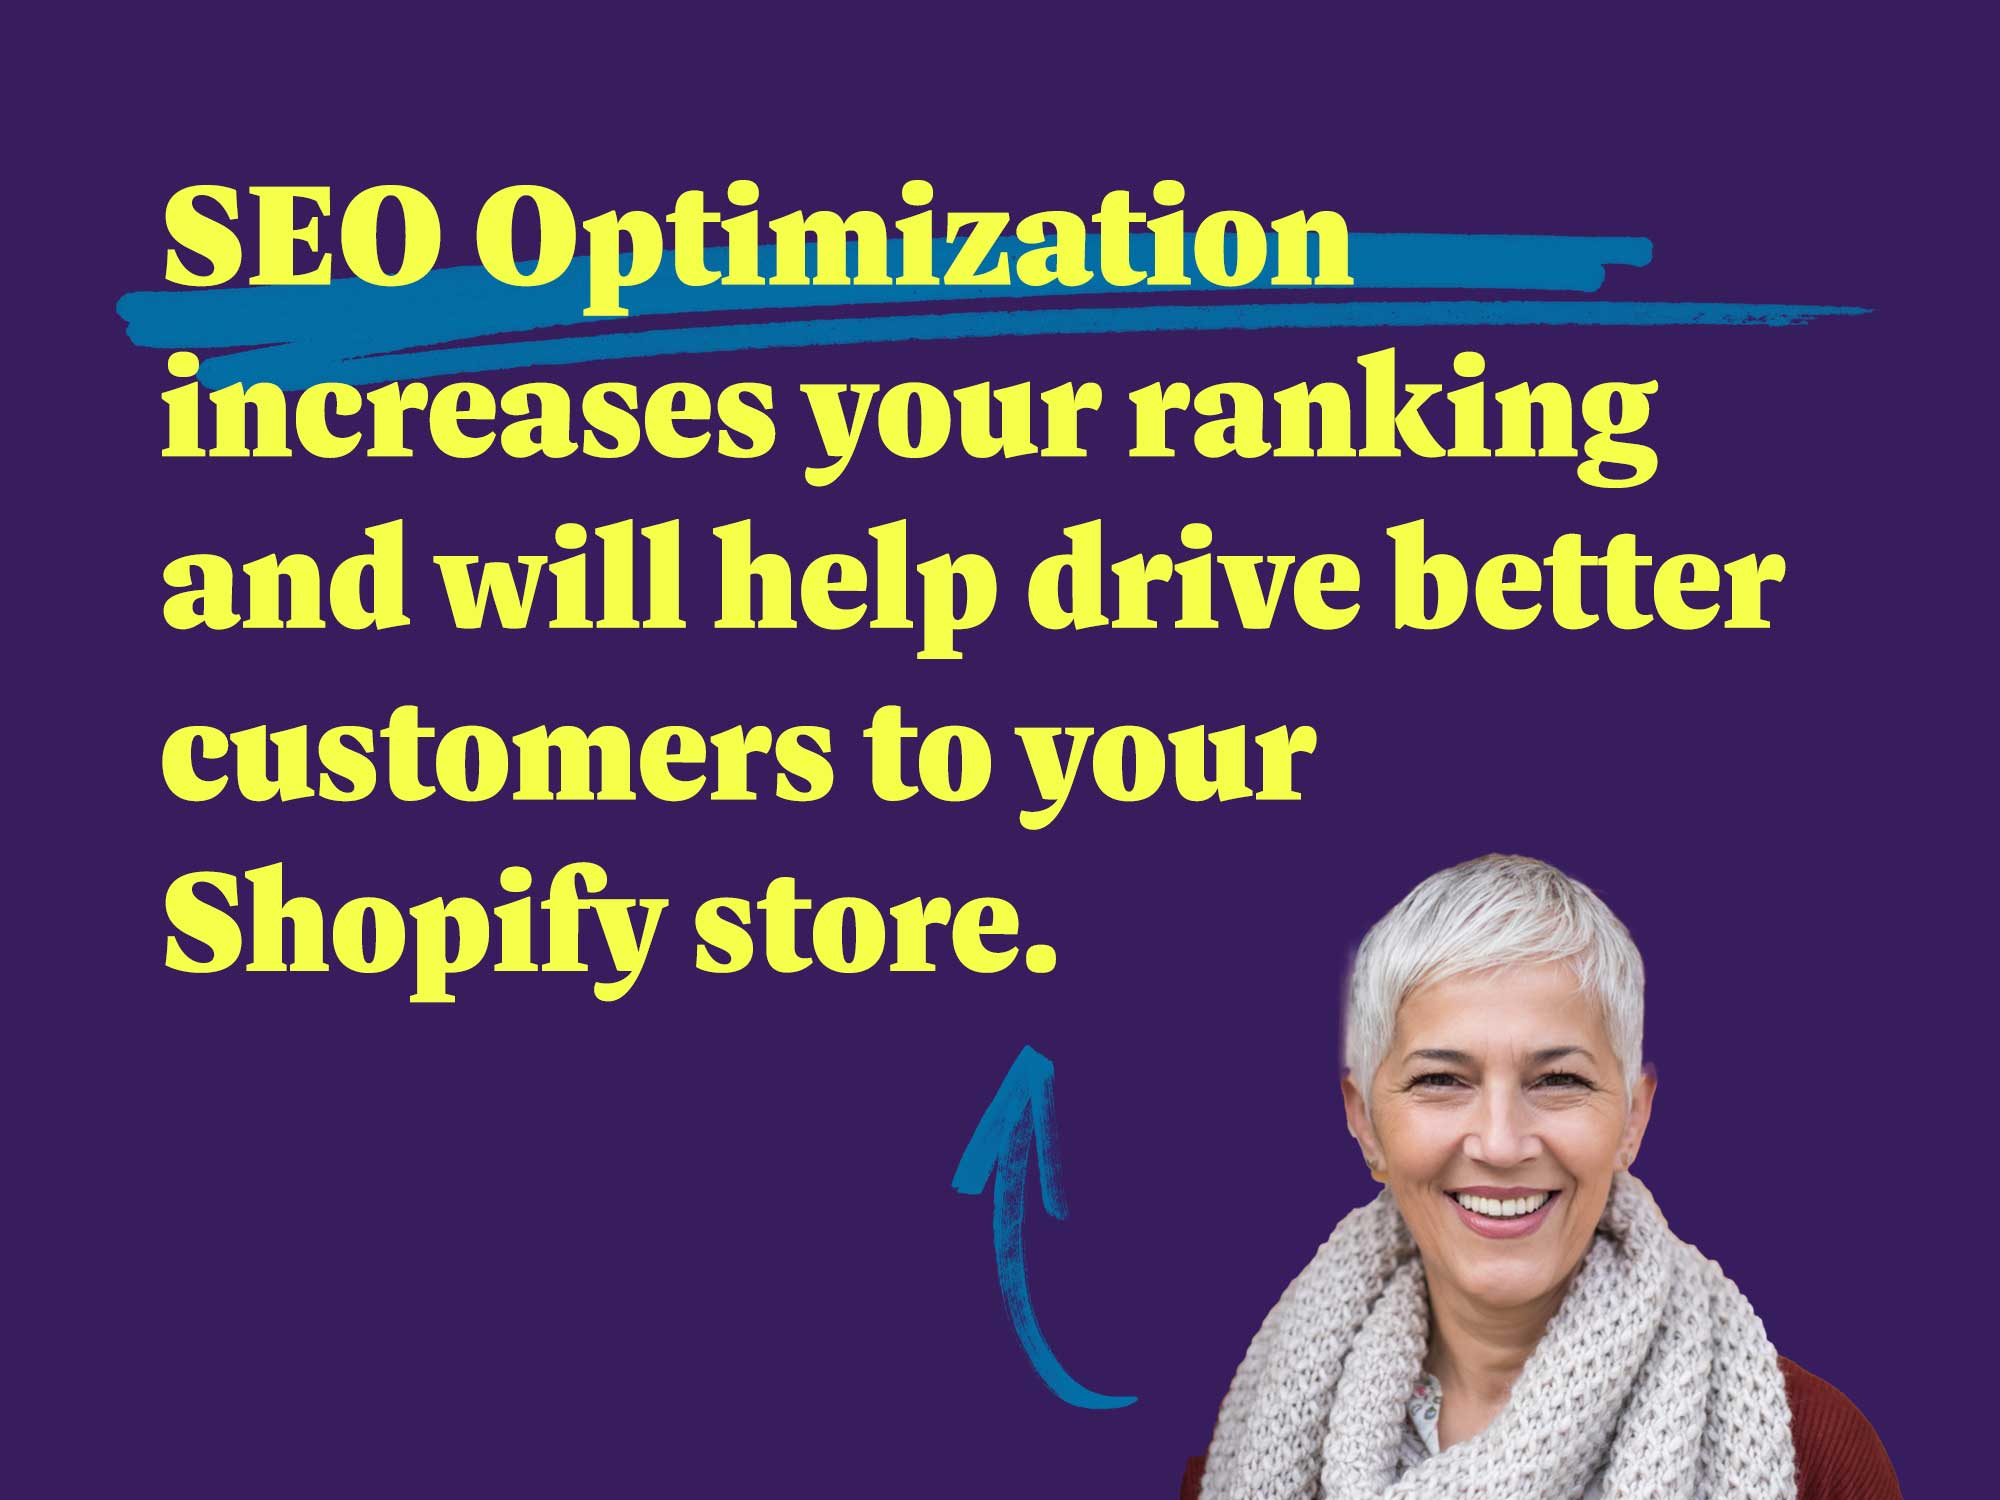 SEO Optimization increases your ranking and will help drive better customers to your Shopify store.